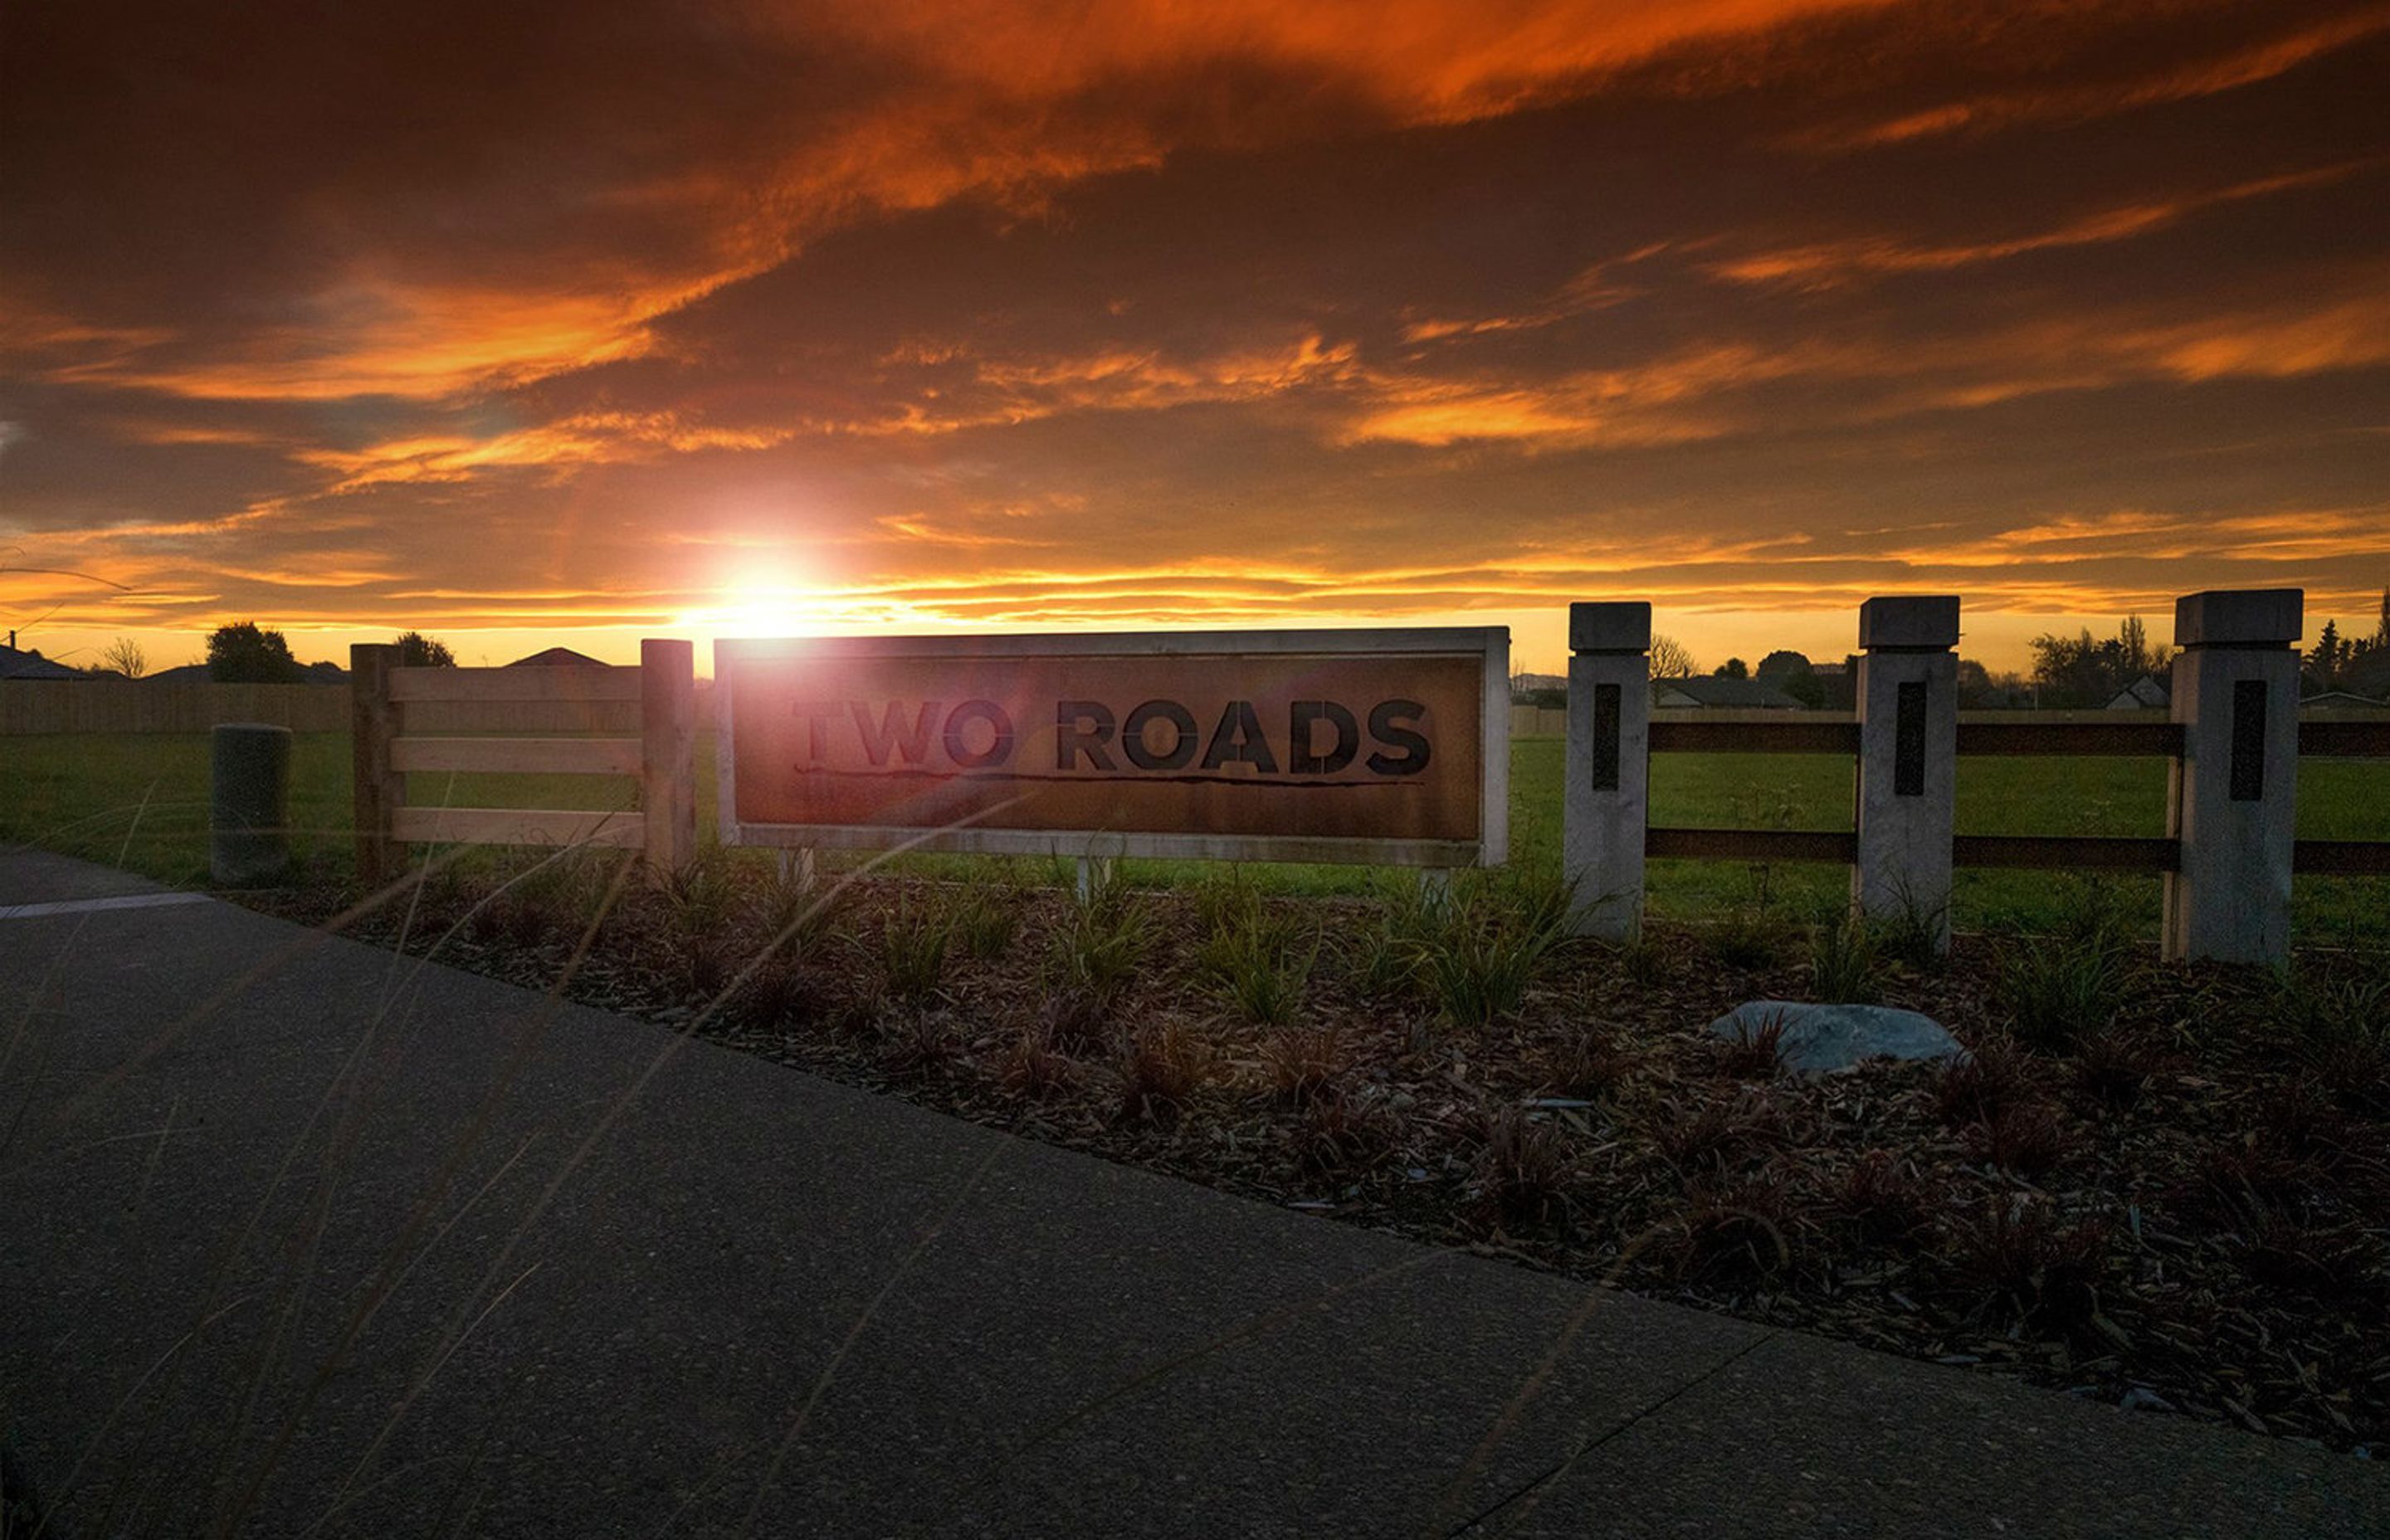 Two Roads, Woodend